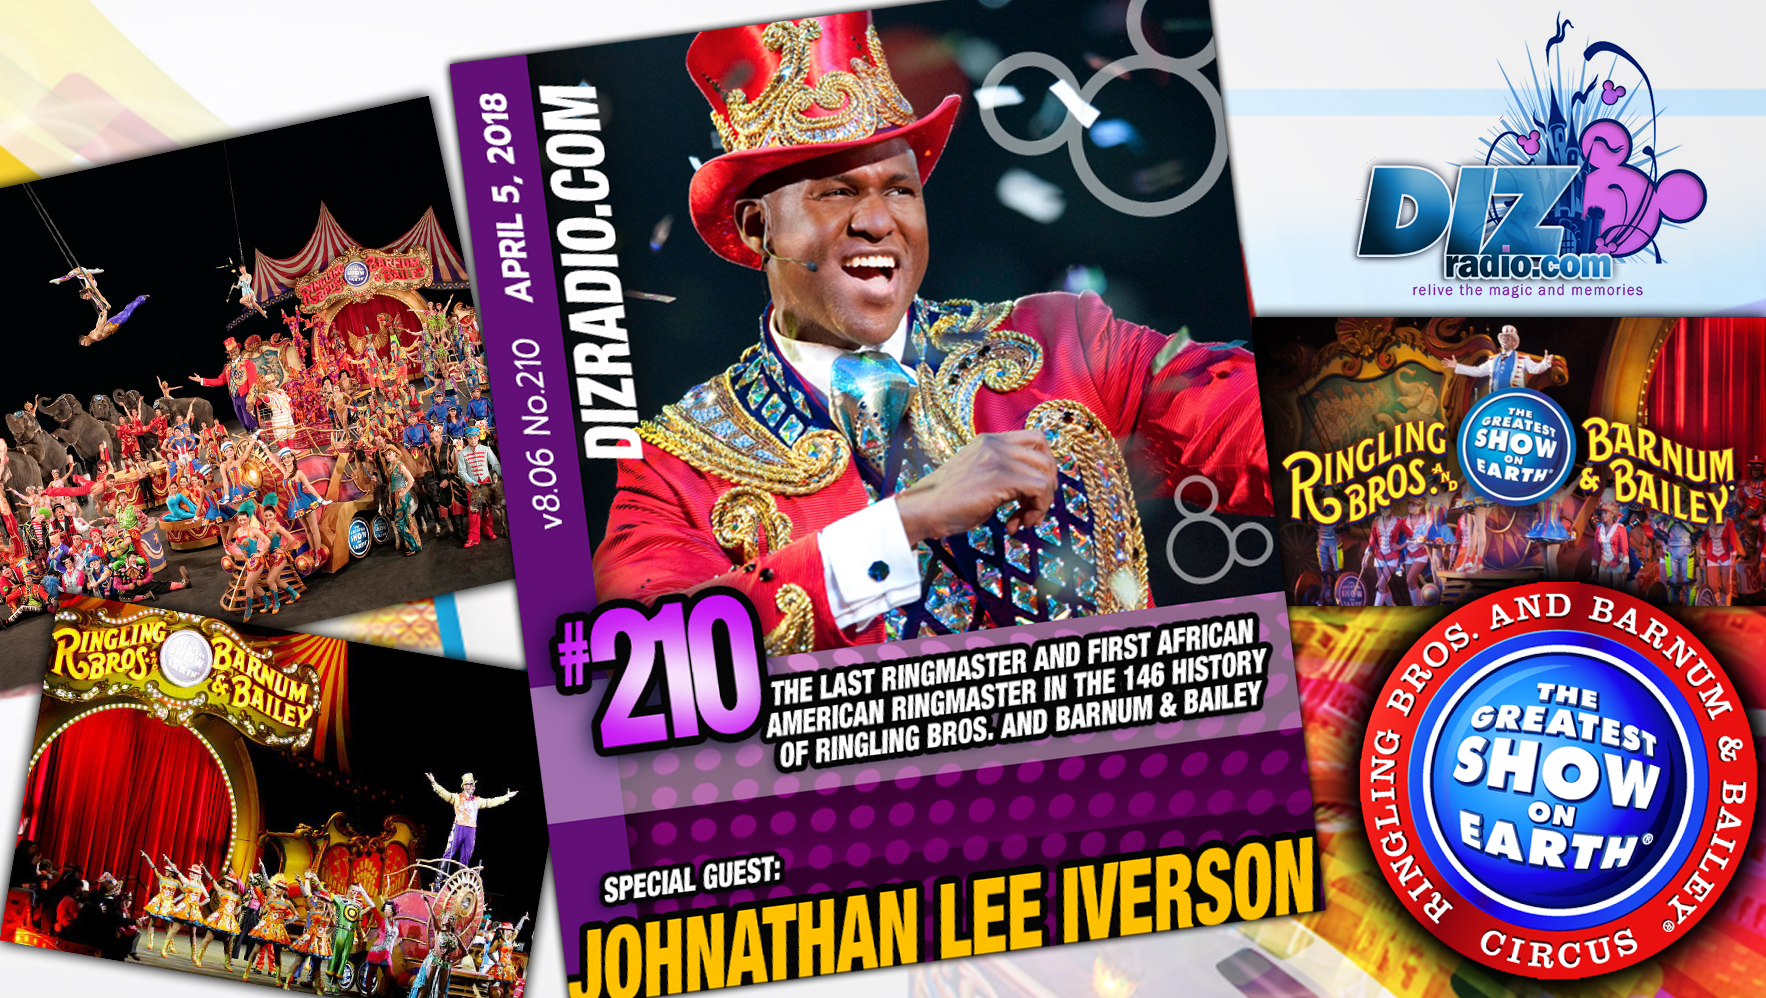 DisneyBlu's DizRadio Disney on Demand Show #210 w/ Guest JOHNATHAN LEE IVERSON (The Last Ringmaster and First African American Ringmaster in the 146 Year History of Ringling Bros. and Barnum & Bailey Circus)